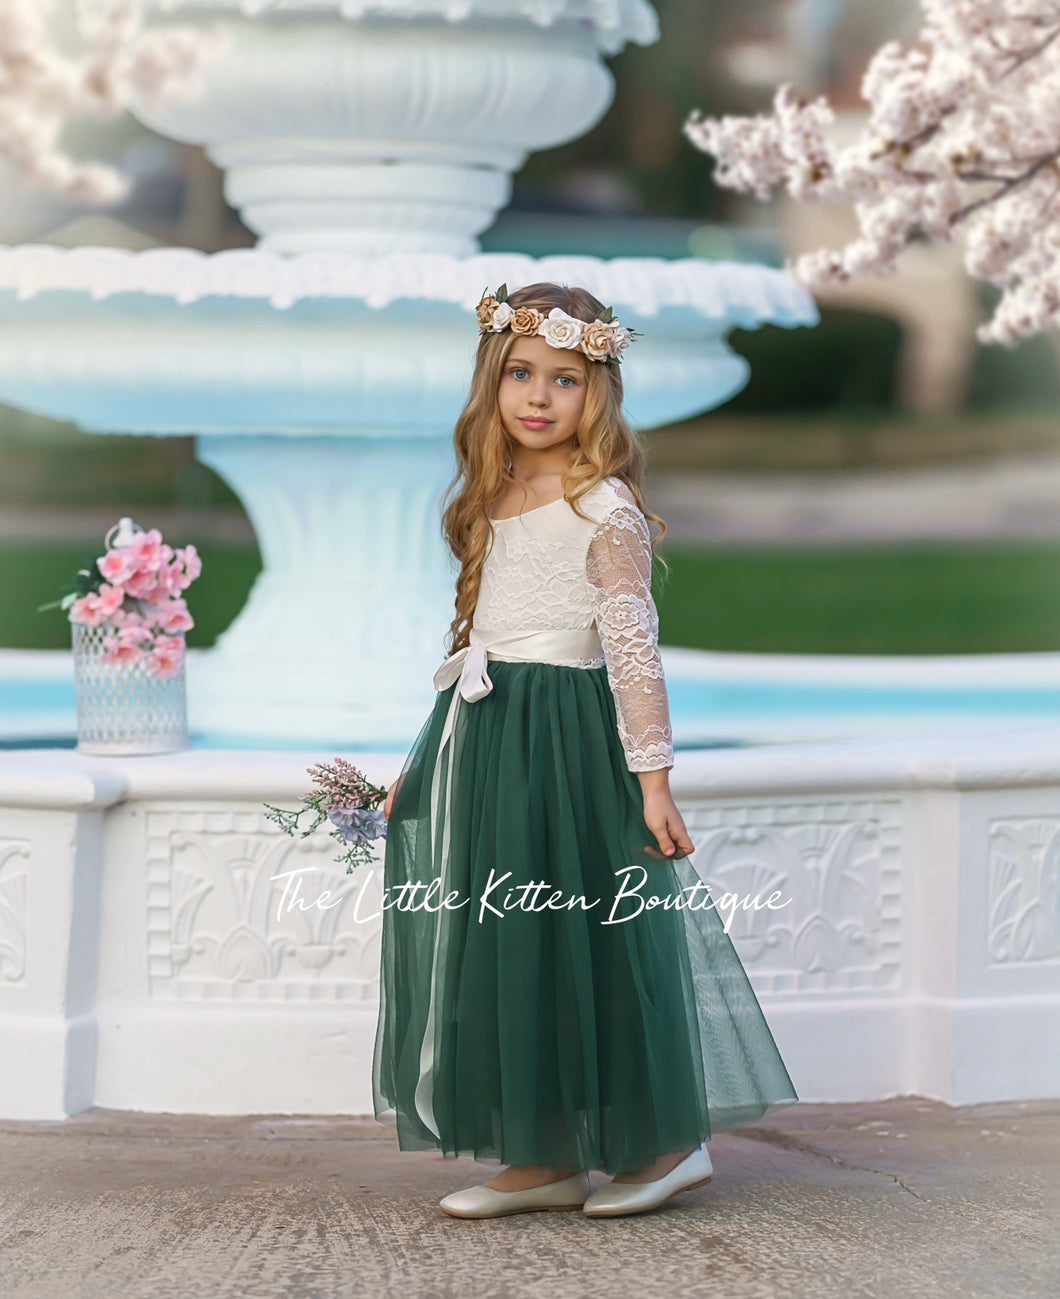 Long Sleeve Forest Green Flower Girl Dress for Weddings, Birthday Parties , Family Photo Shoots and More